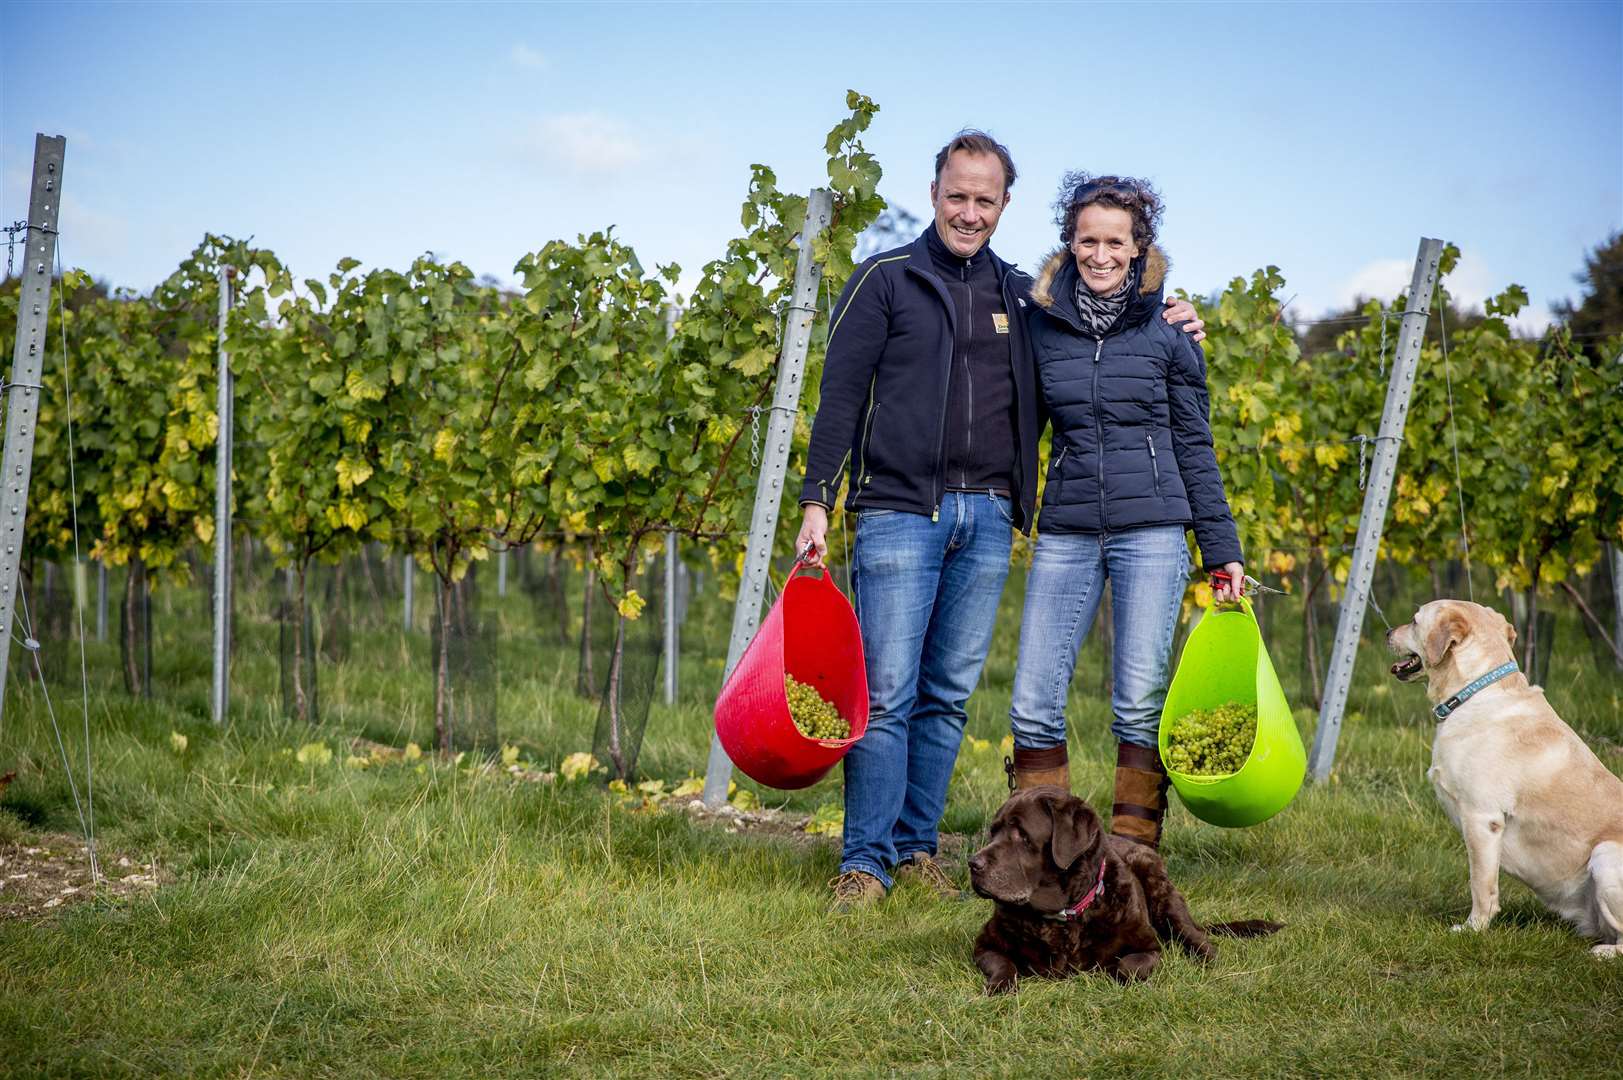 Charles and Ruth Simpson bringing in the grapes at their wine estate